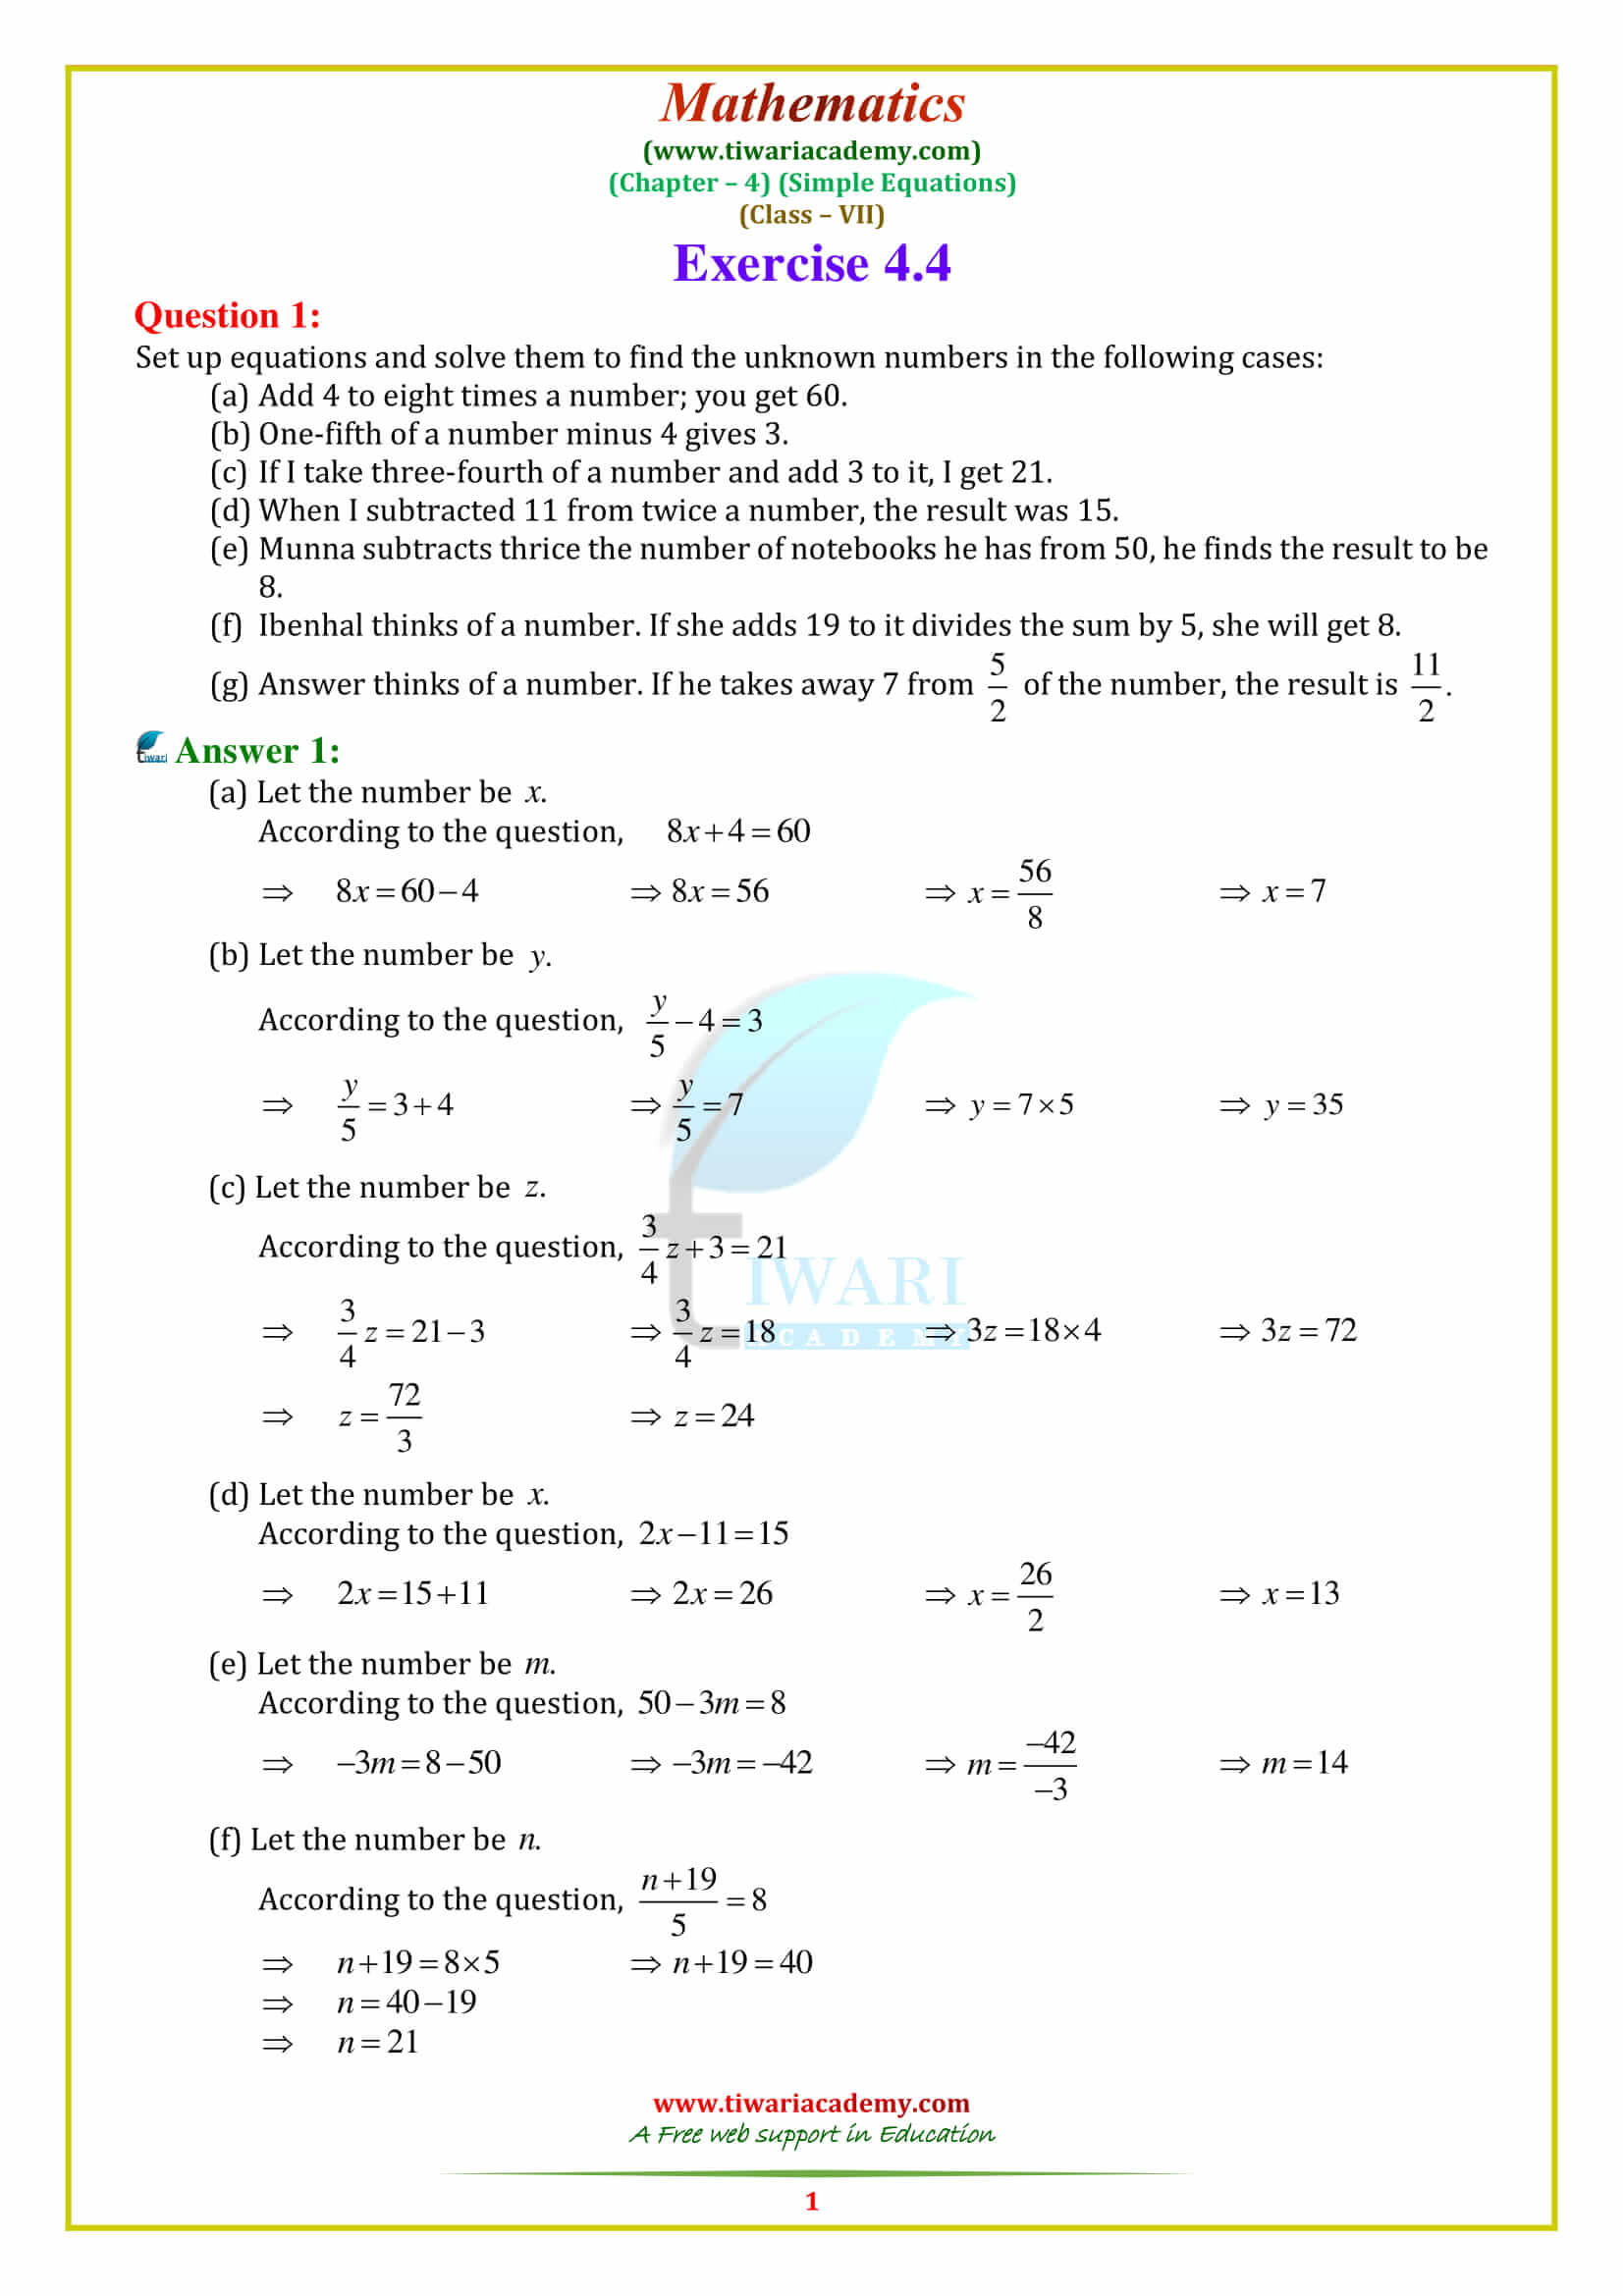 NCERT Solutions for Class 7 Maths Chapter 4 Exercise 4.4